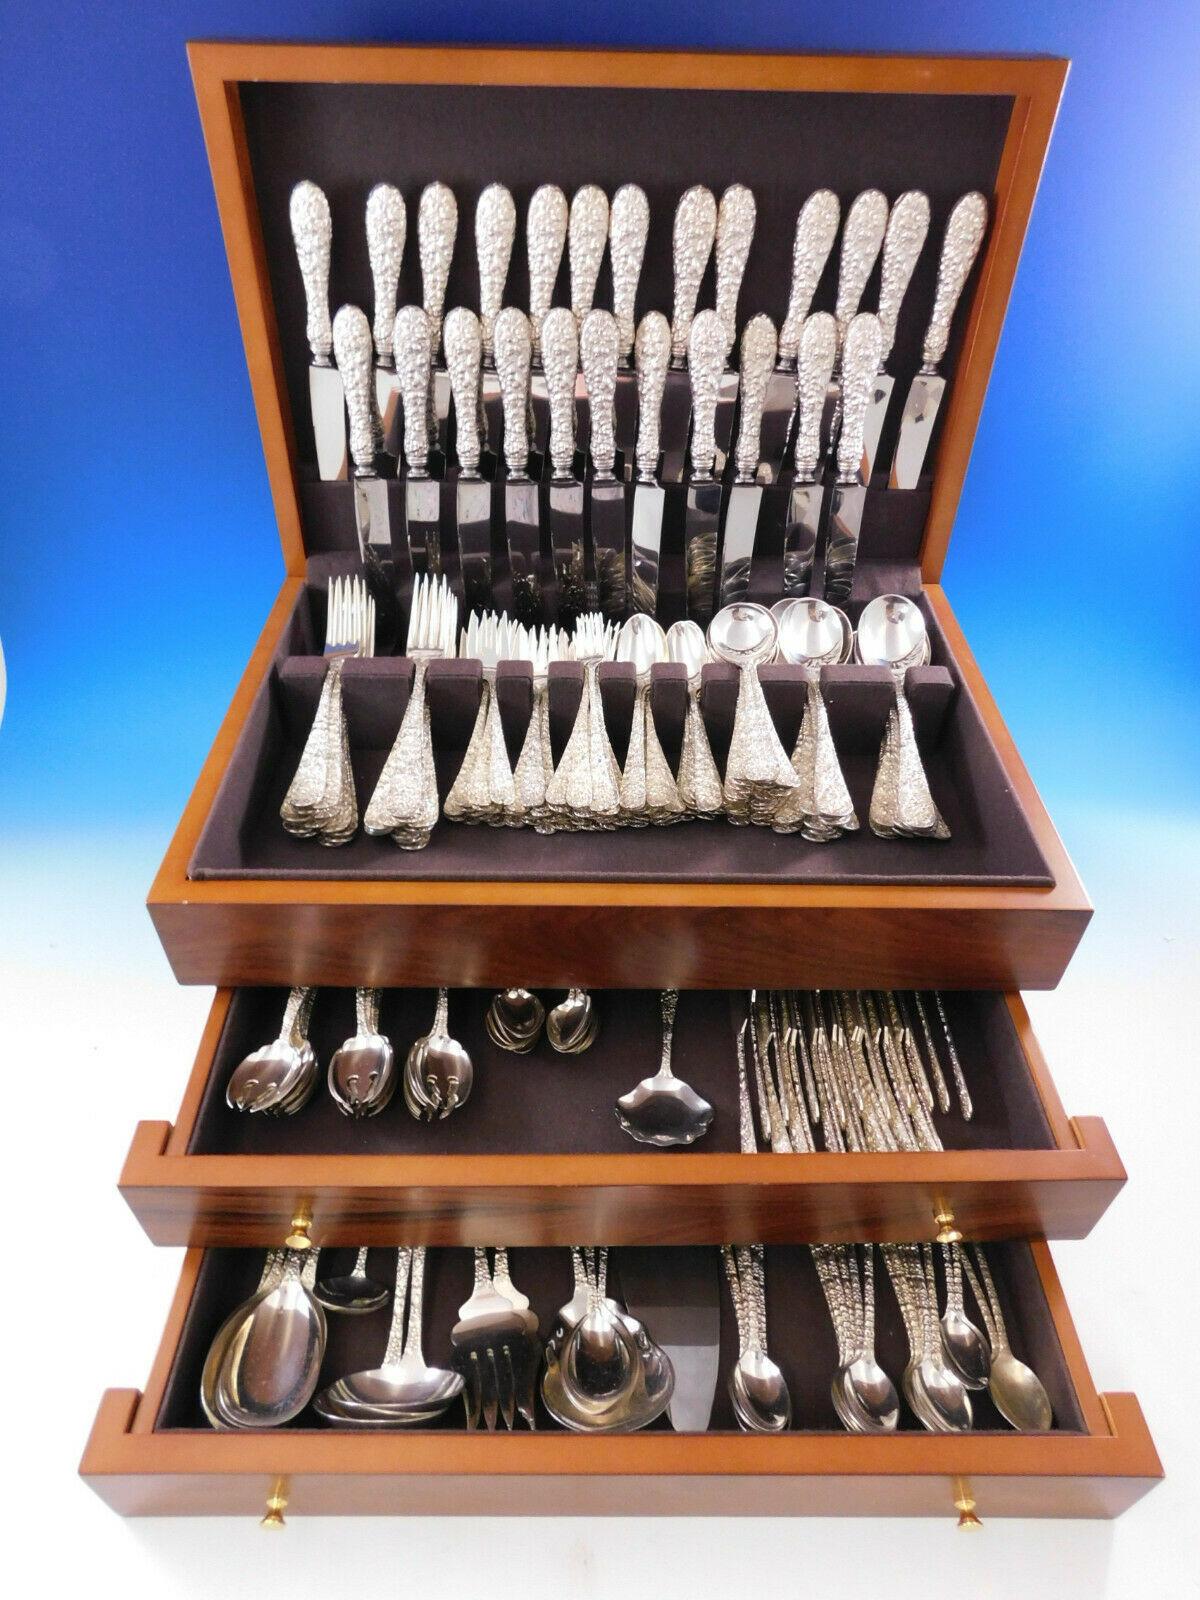 Monumental dinner size rose by Stieff repoussed sterling silver Flatware set, 285 pieces. This set for 24 includes:

24 dinner size knives, 9 1/2